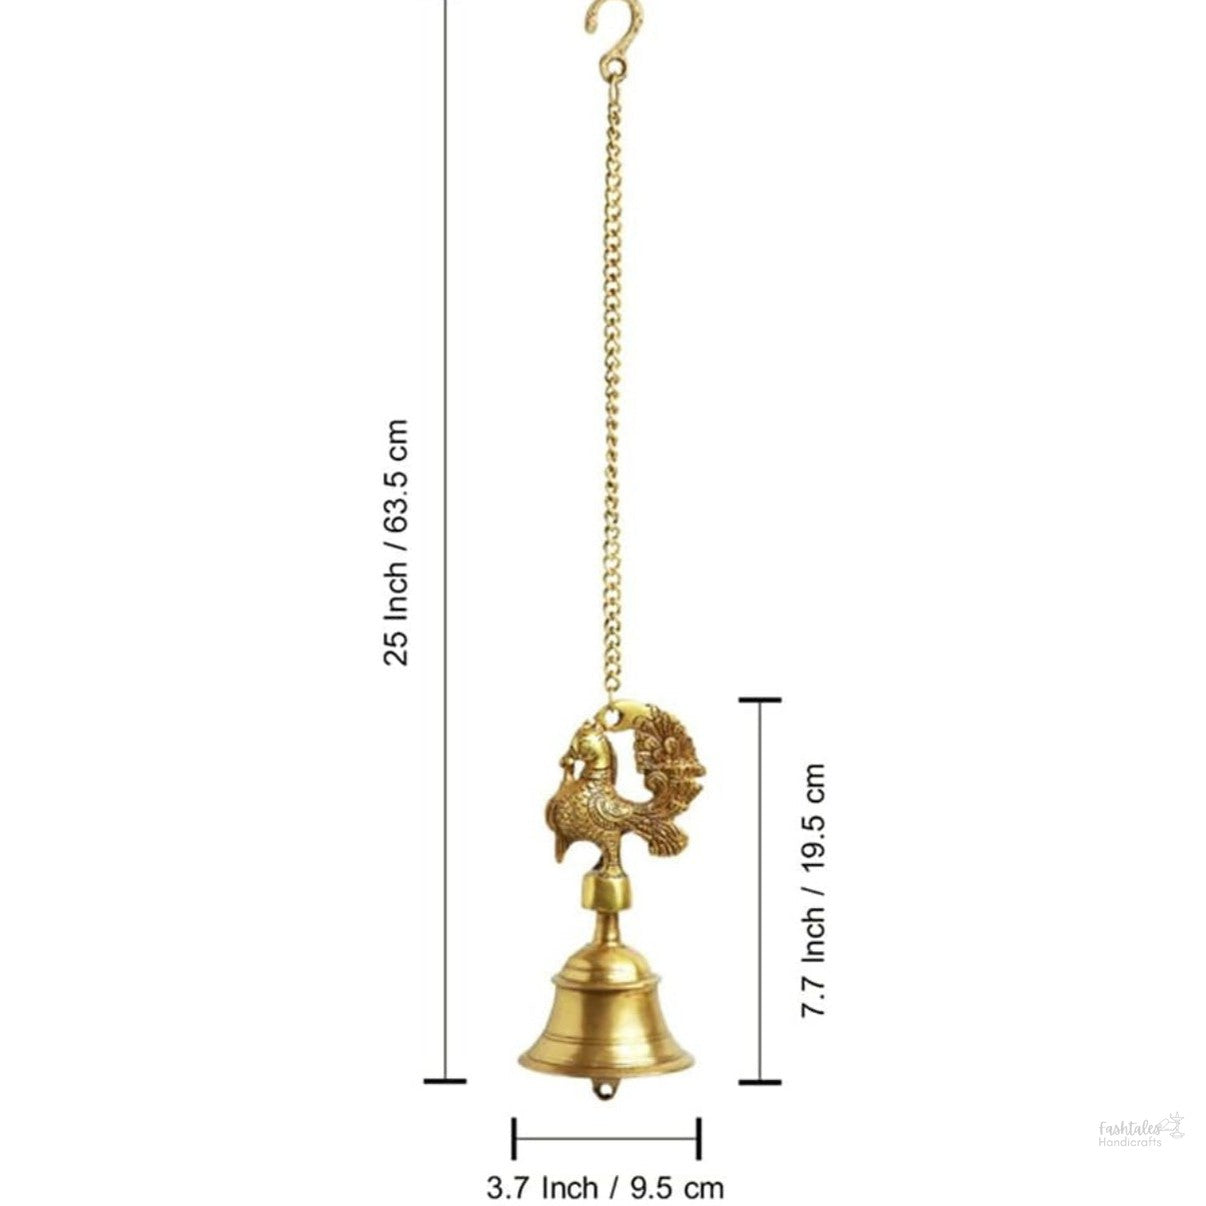 Fashtales Handicrafts 'Peacock' Brass Decorative Hanging Bells for Home Decoration (Set of 2, Pure Brass, 3.7X 3.7 x 7.7 Inch, 2.2 Kg) |Brass Bell Hanging Decorative Items Bell for Mandir Bell for Pooja Room